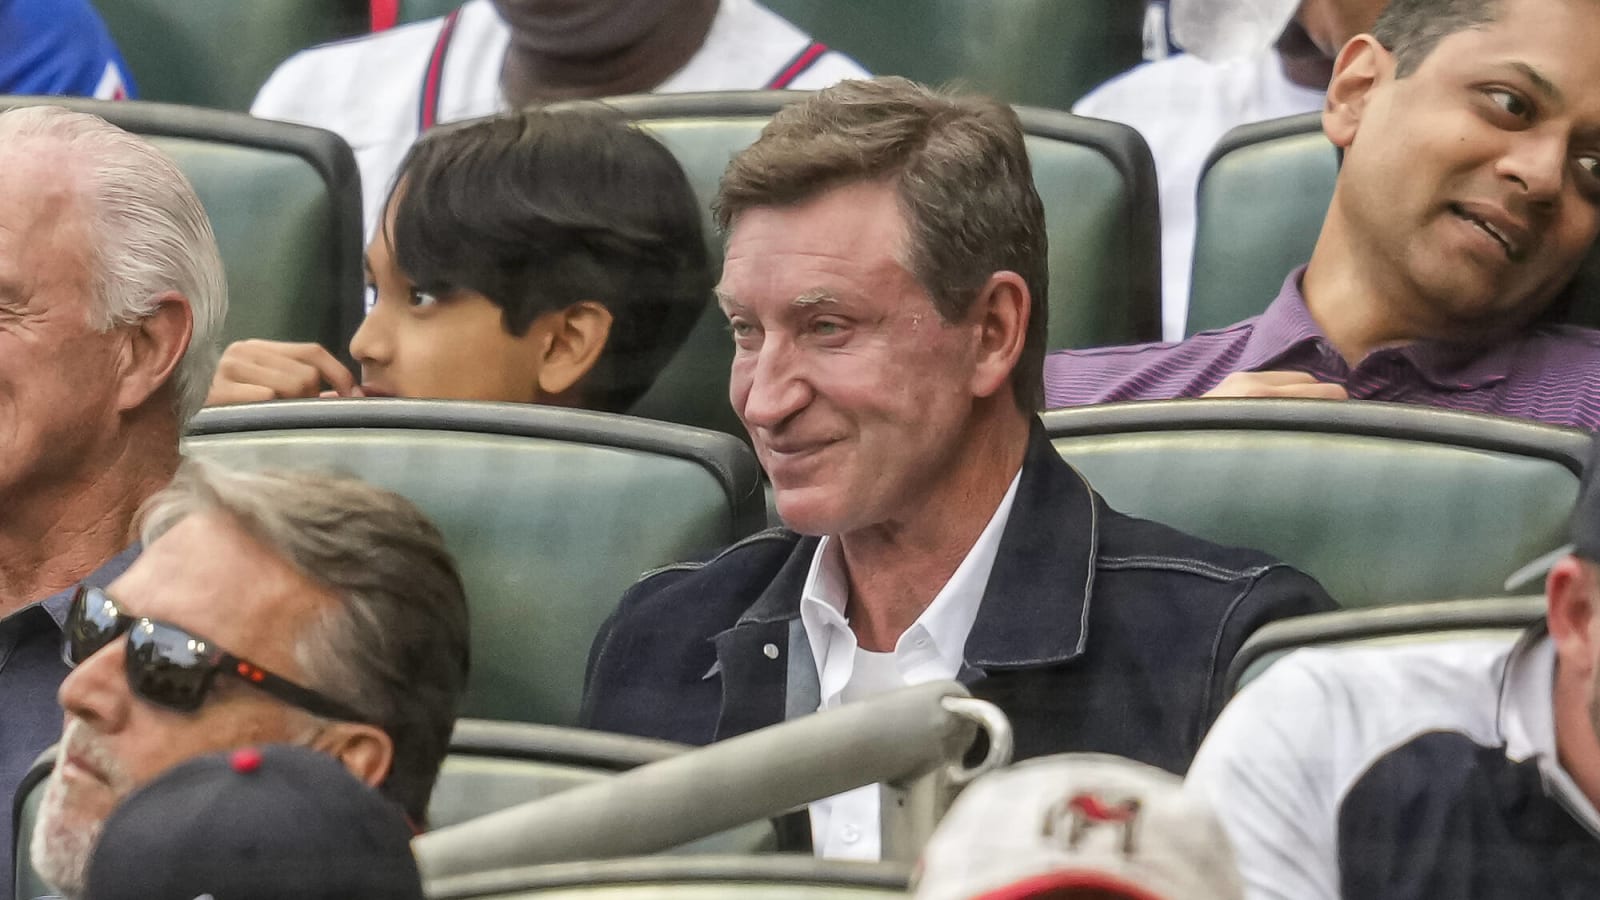 Wayne Gretzky Says He Has Unique Working Relationship with Oilers